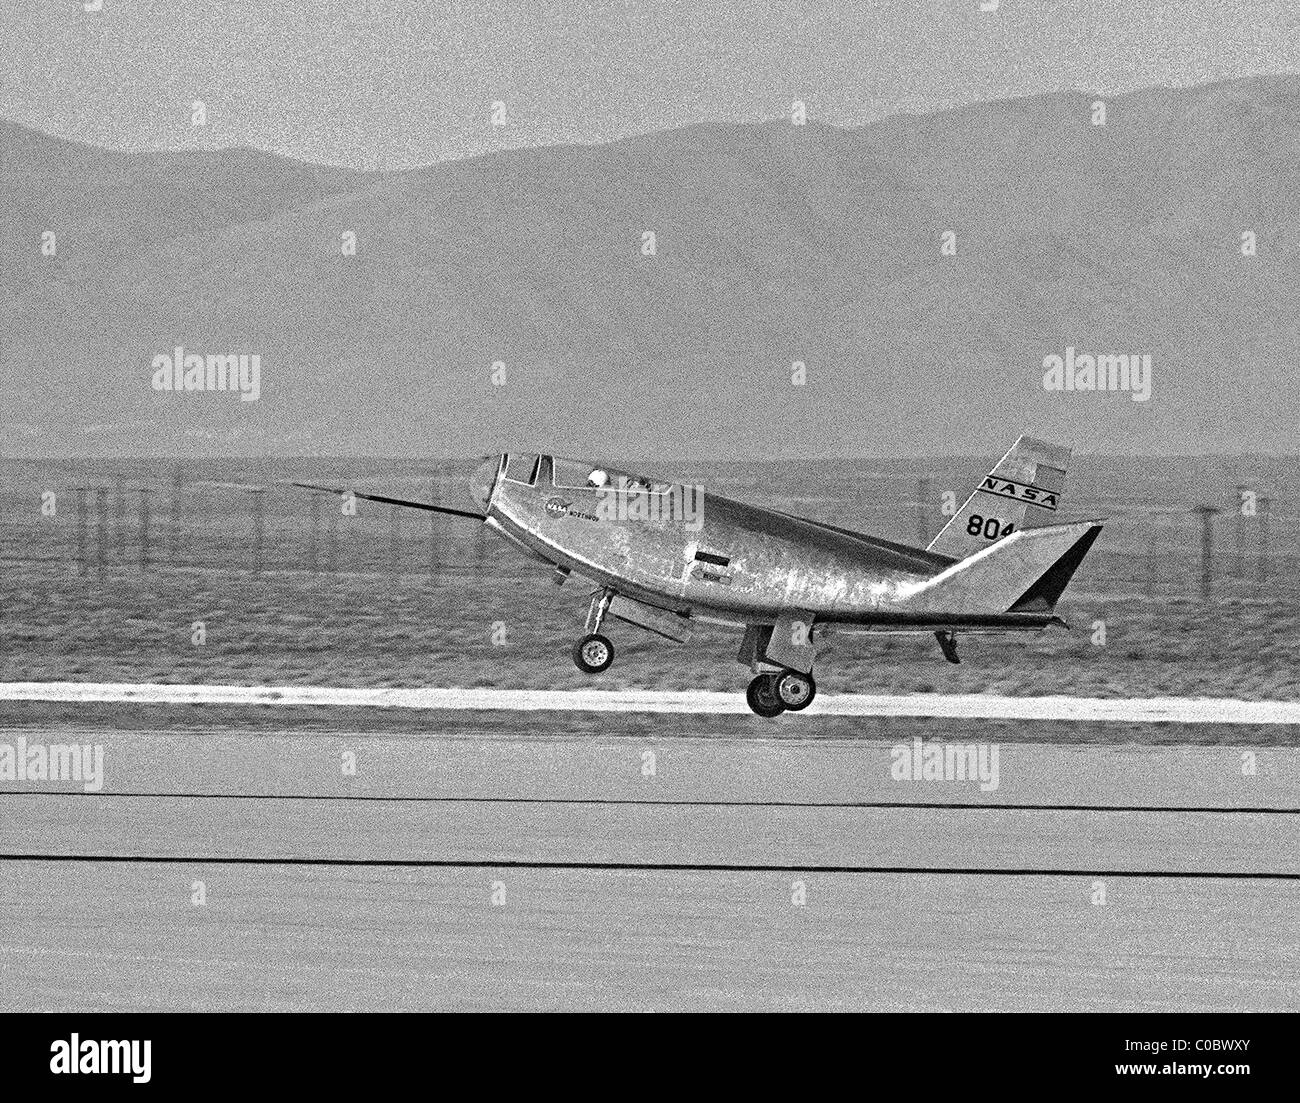 HL-10 lifting body aircraft makes a successful landing on Rogers Dry Lake at Dryden Flight Research Center Stock Photo